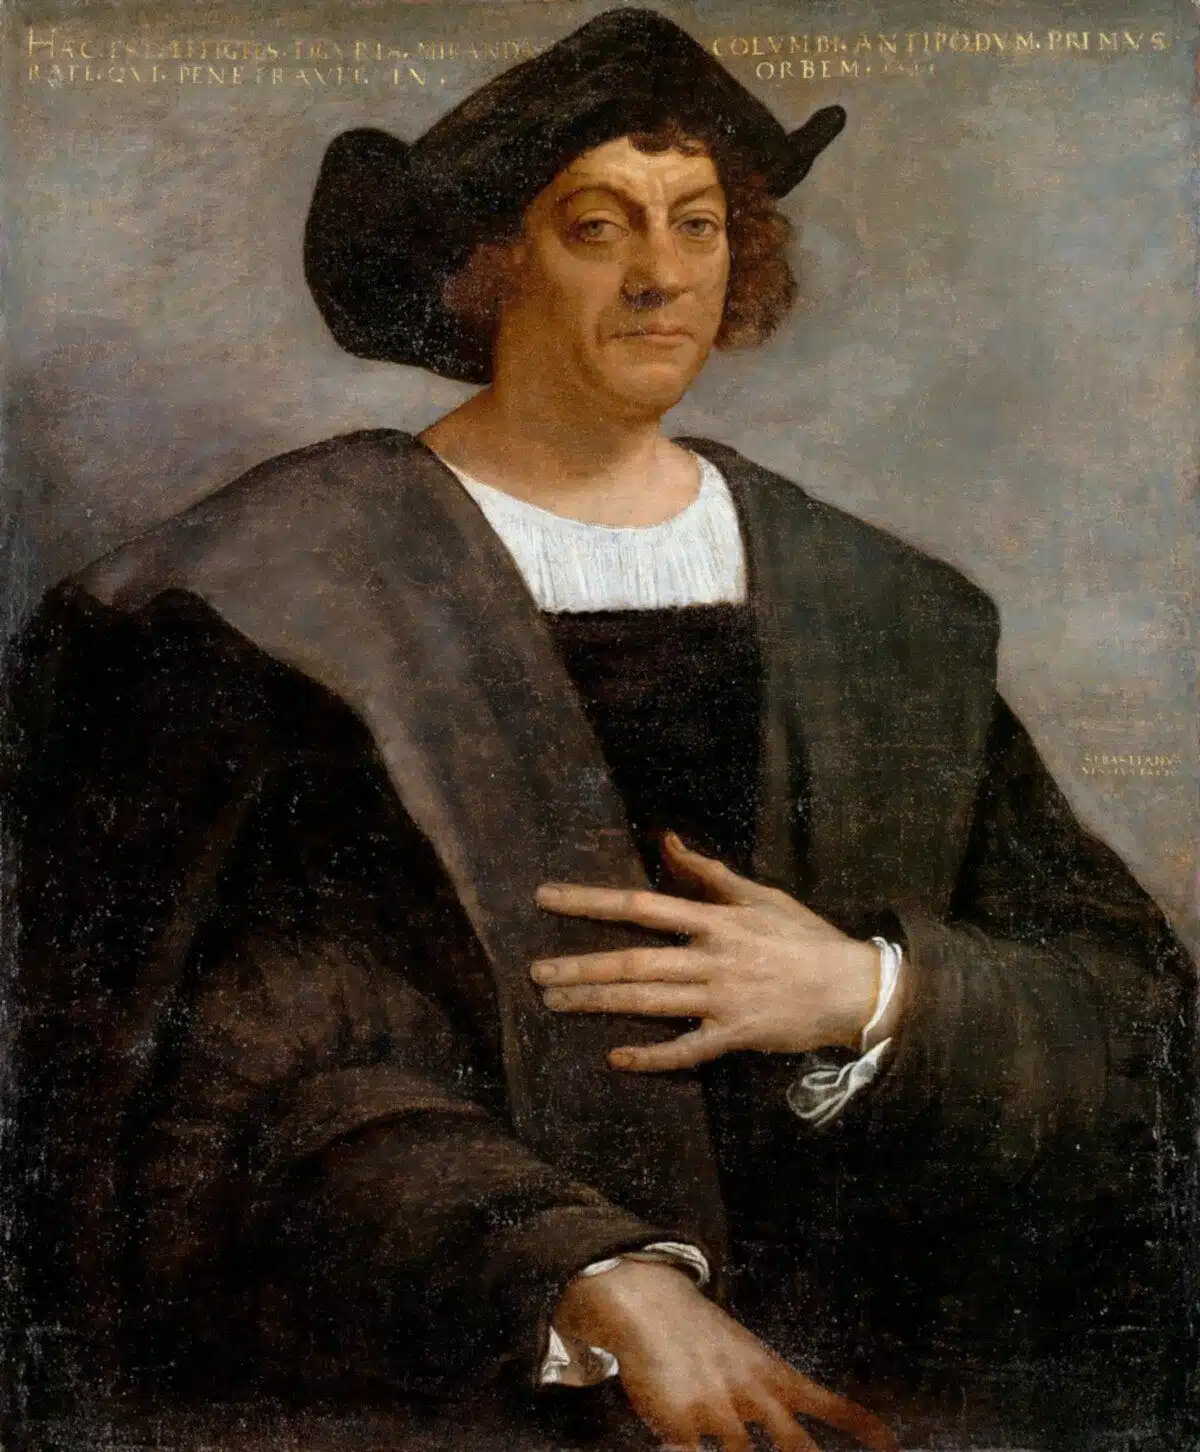 Columbus is one of the best-known world explorers from history.